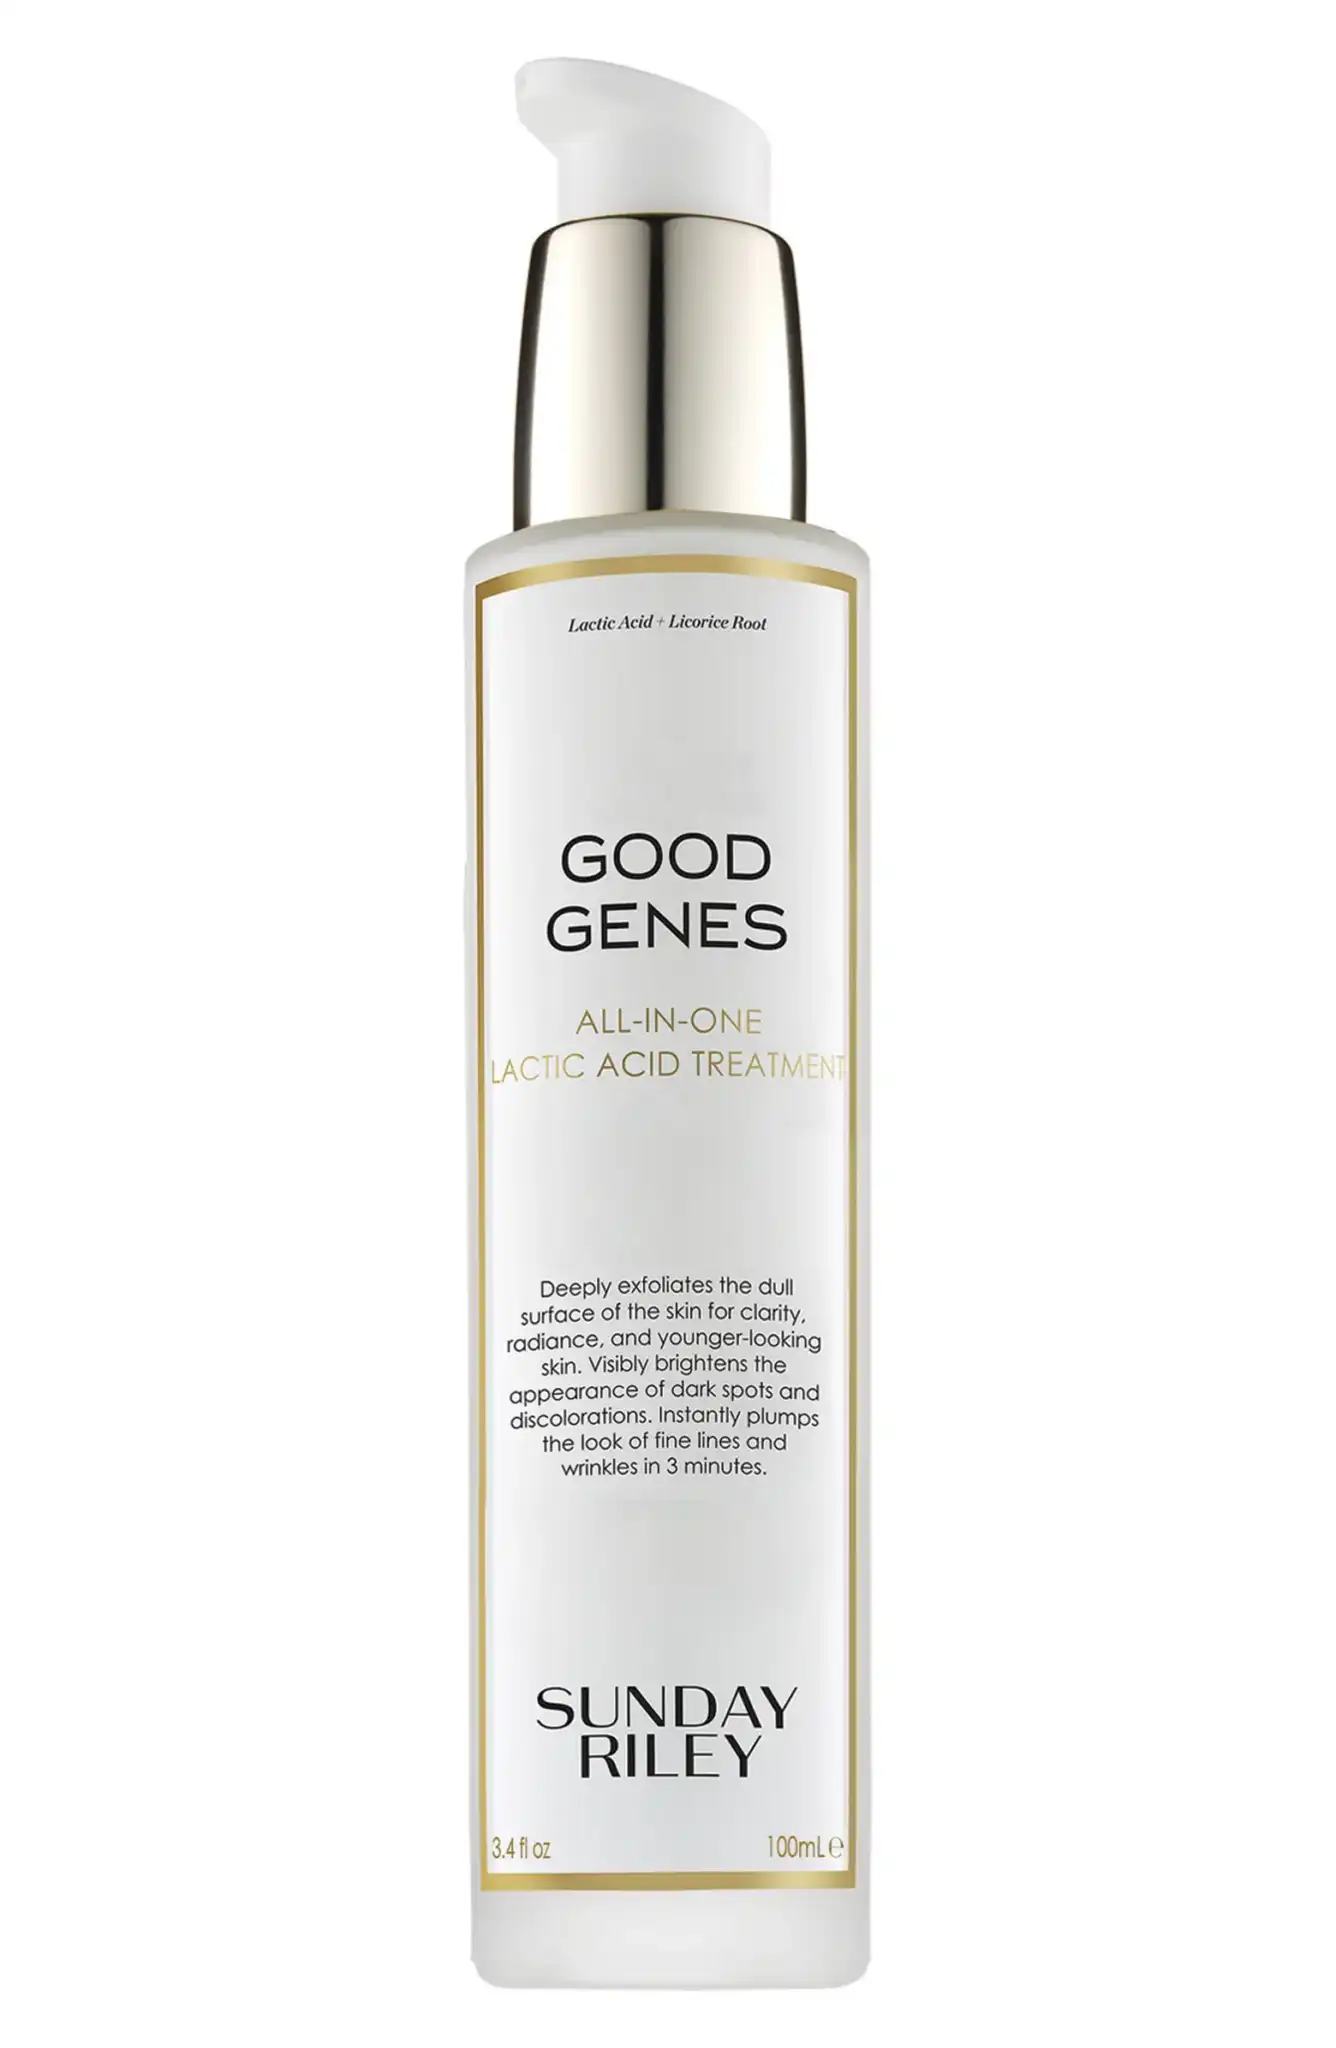 Jumbo Good Genes All-in-One Lactic Acid Exfoliating Face Treatment